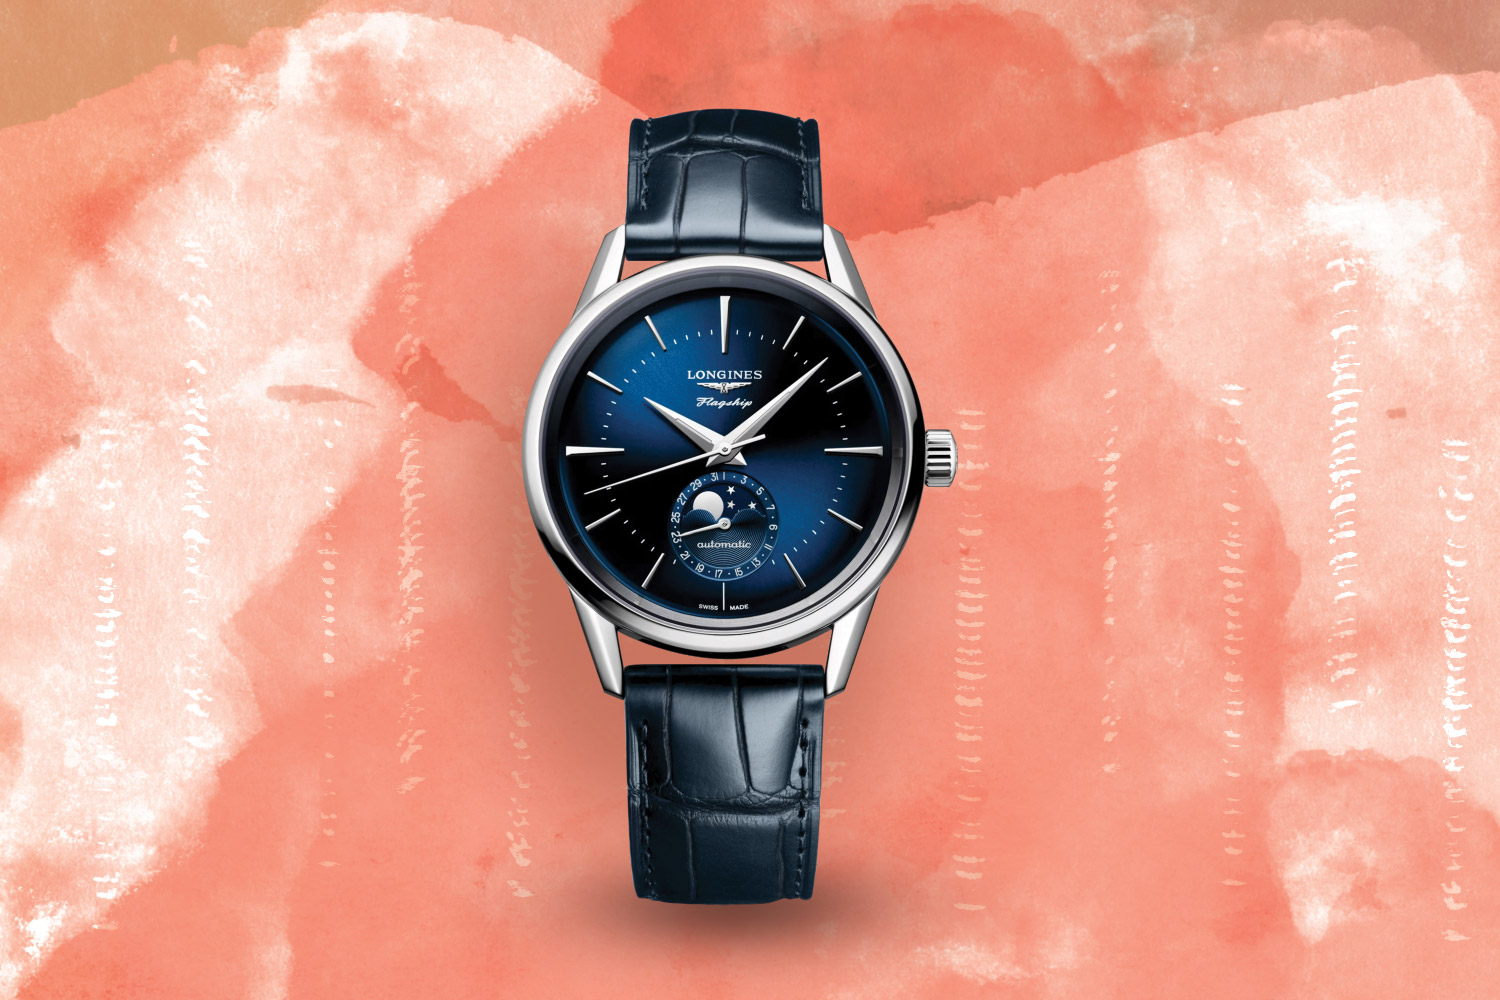 Blue, silver and black Longines Flagship Heritage watch